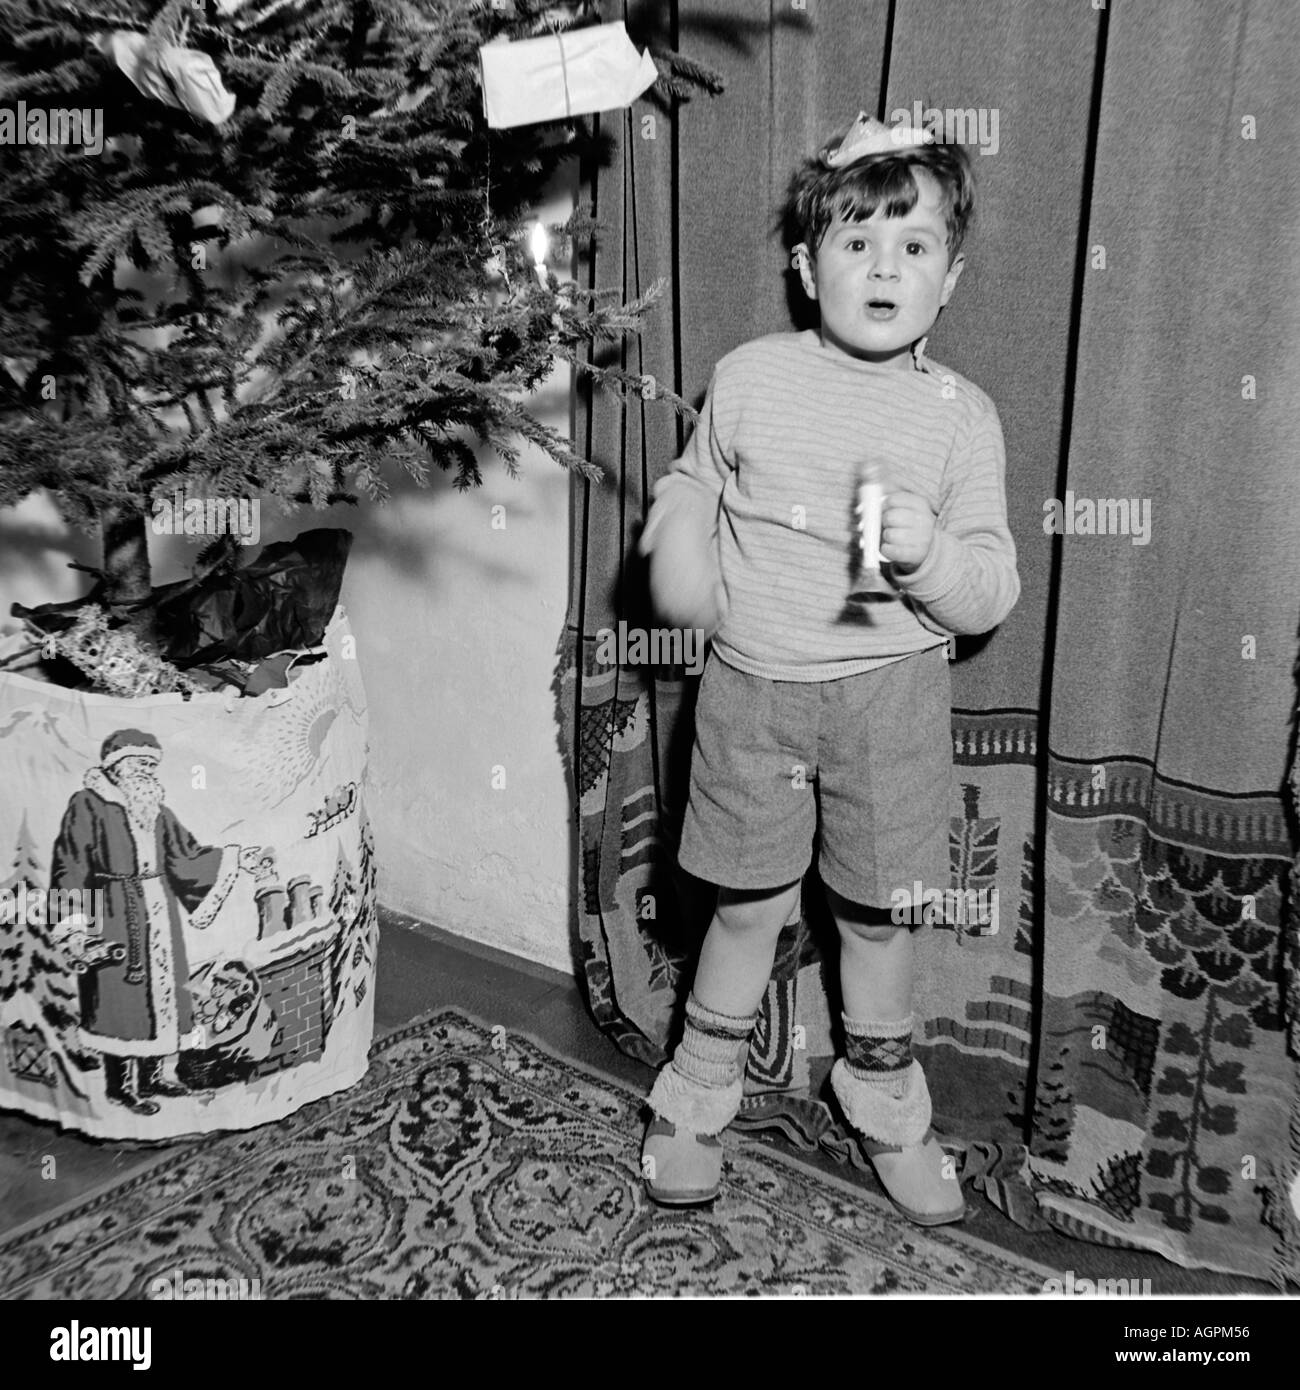 OLD VINTAGE SNAPSHOT FAMILLE PHOTOGRAPHIE DE YOUNG BOY WEARING PARTY HAT PLAYING WITH TOY TROMPETTE NEXT TO CHRISTMAS TREE Banque D'Images